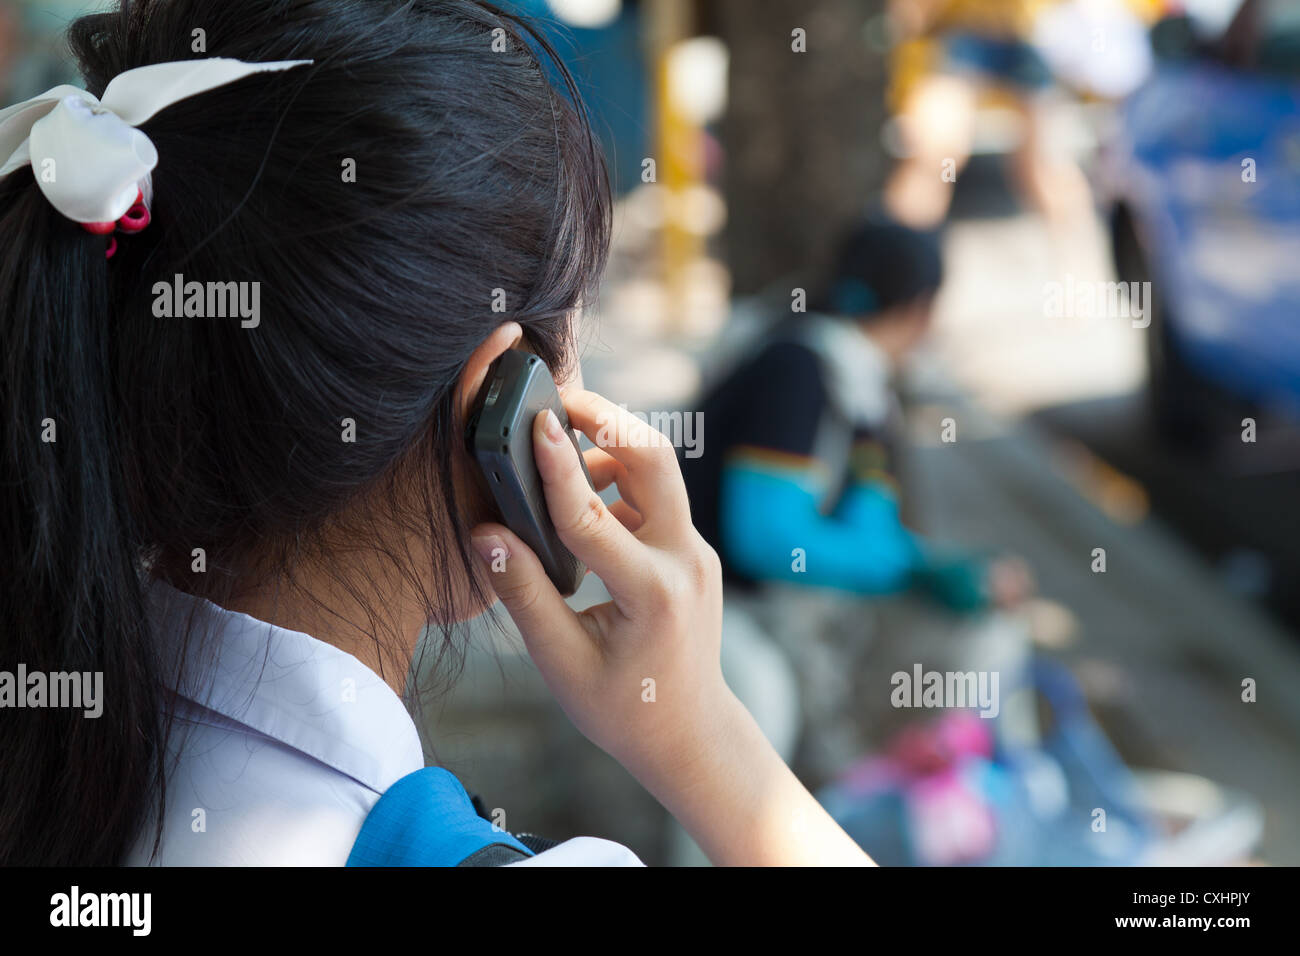 Woman on the Phone in Chiang Mai Stock Photo